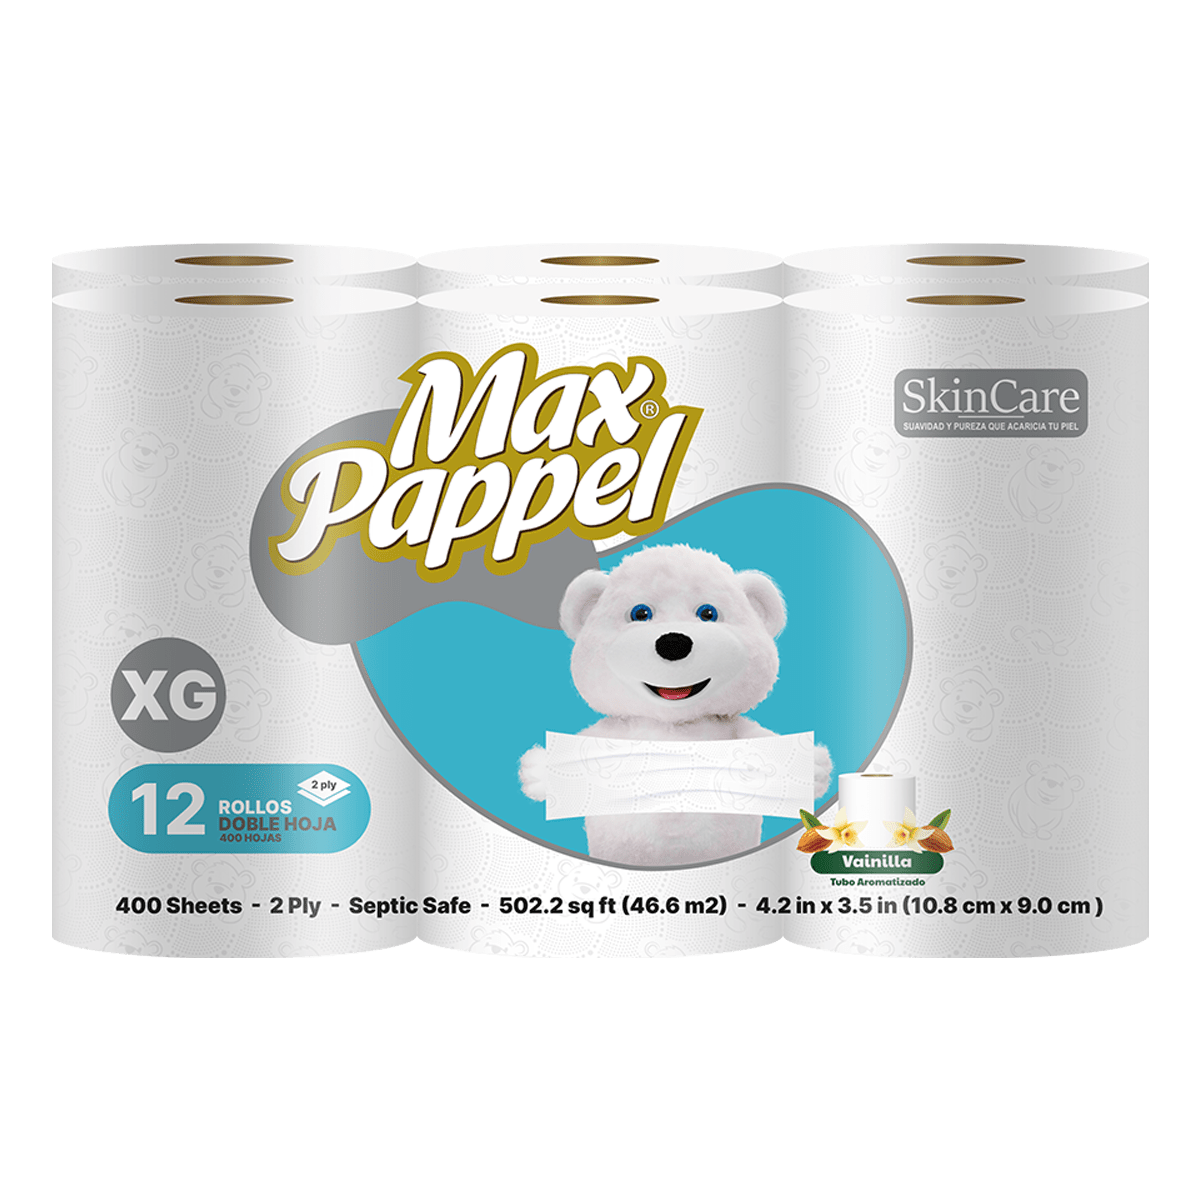 Two Ply Skin Care <br>4 Packs x 12 Rolls